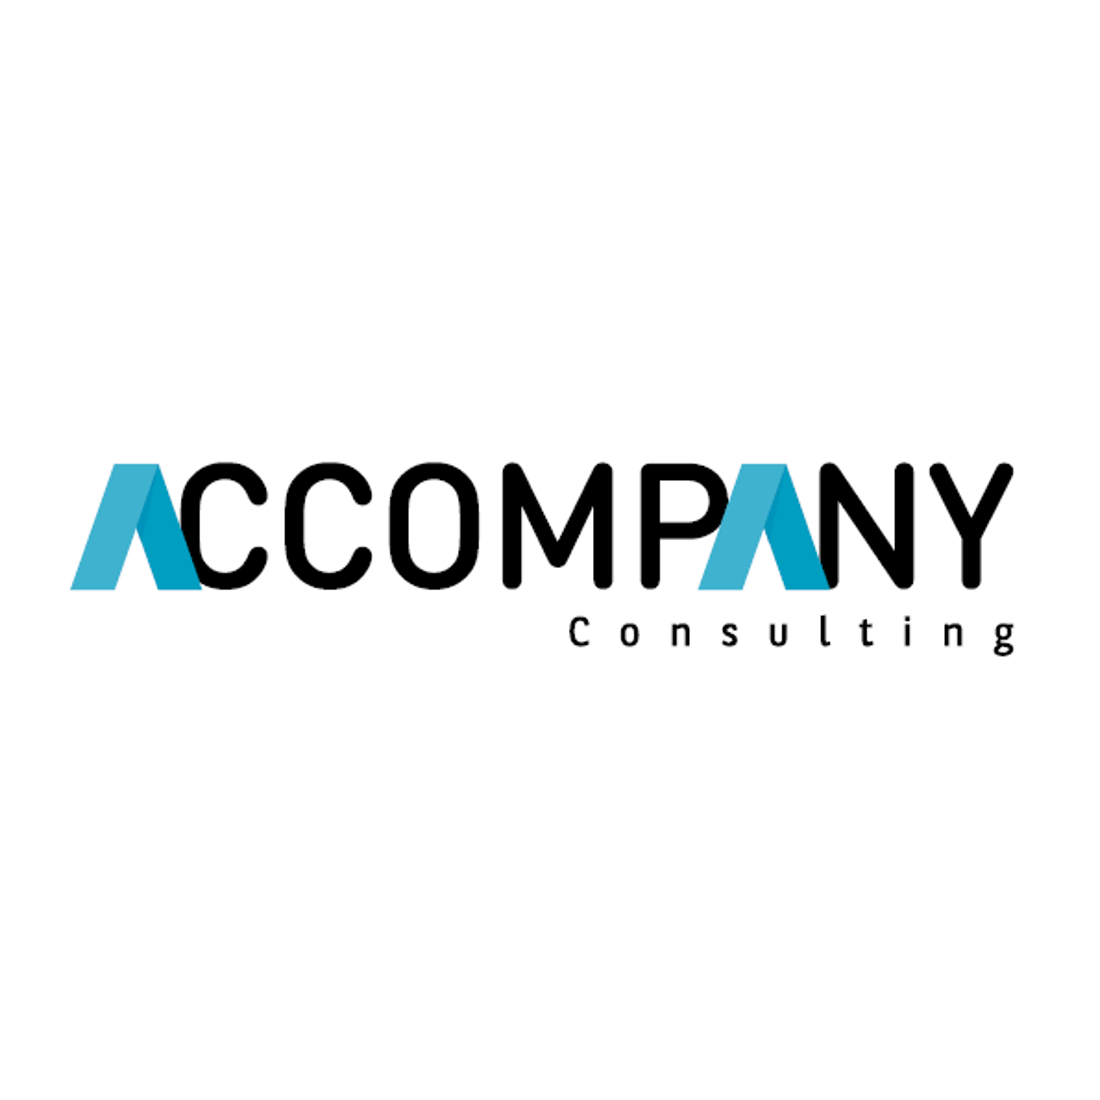 Accompany-Consulting-2.png